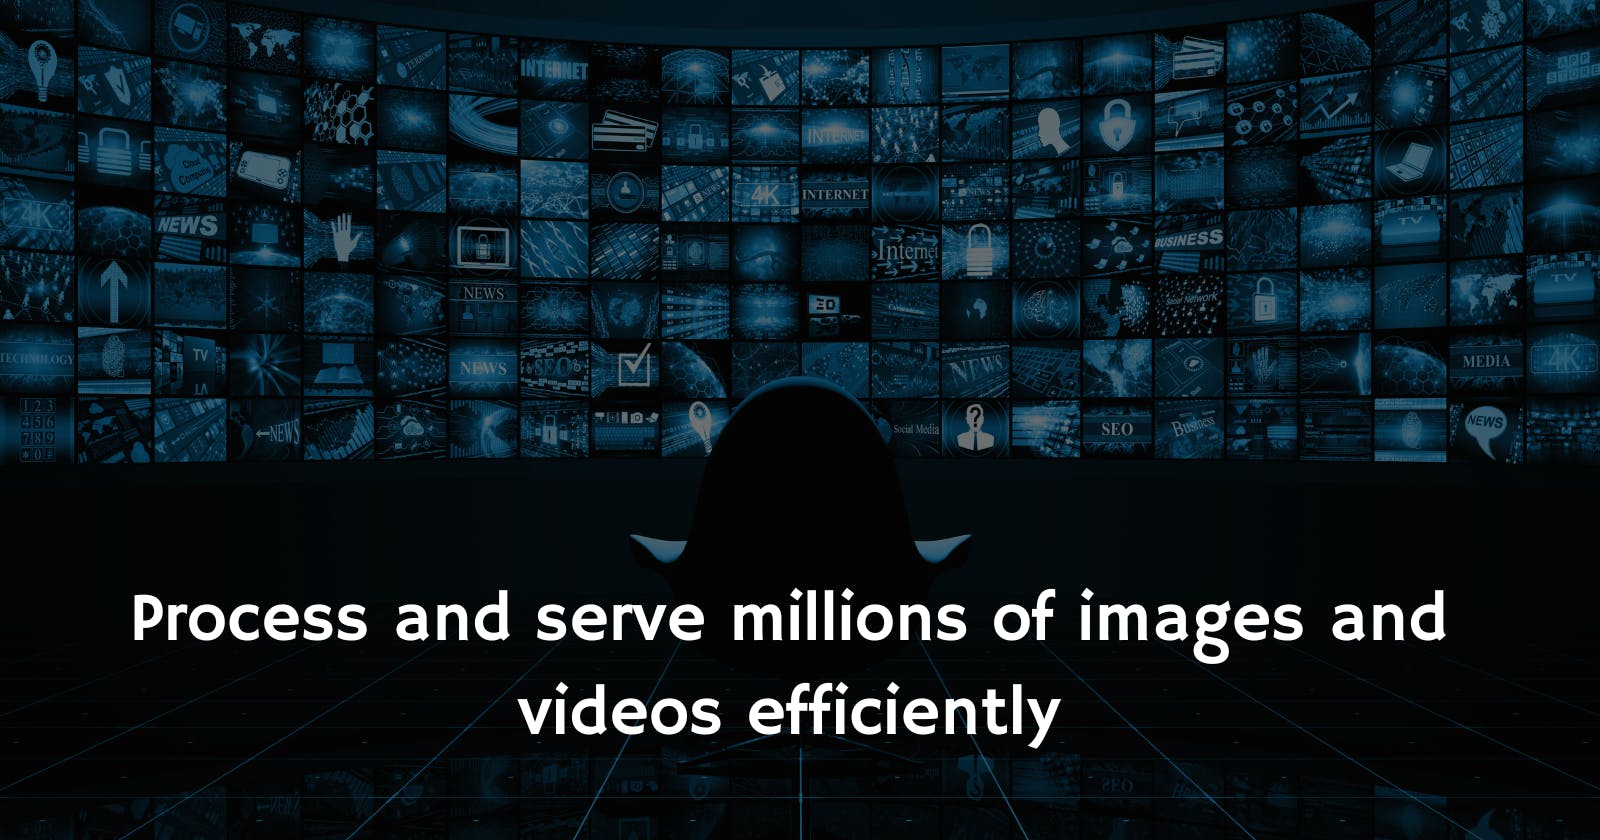 Process and serve millions of images and videos efficiently - A media management system for social networks